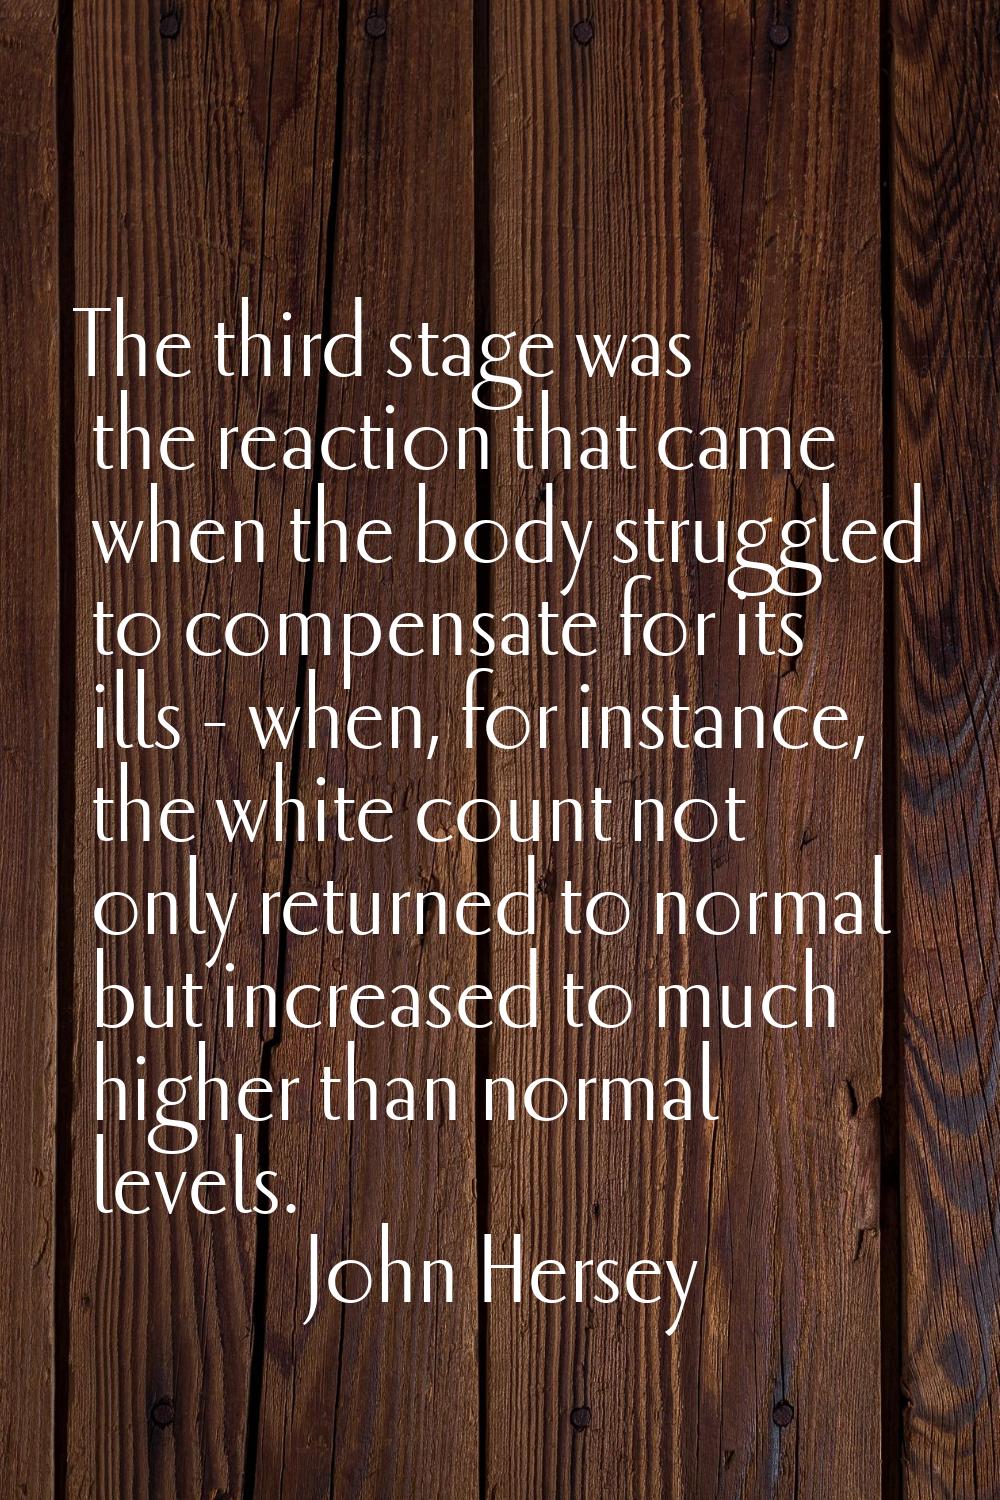 The third stage was the reaction that came when the body struggled to compensate for its ills - whe